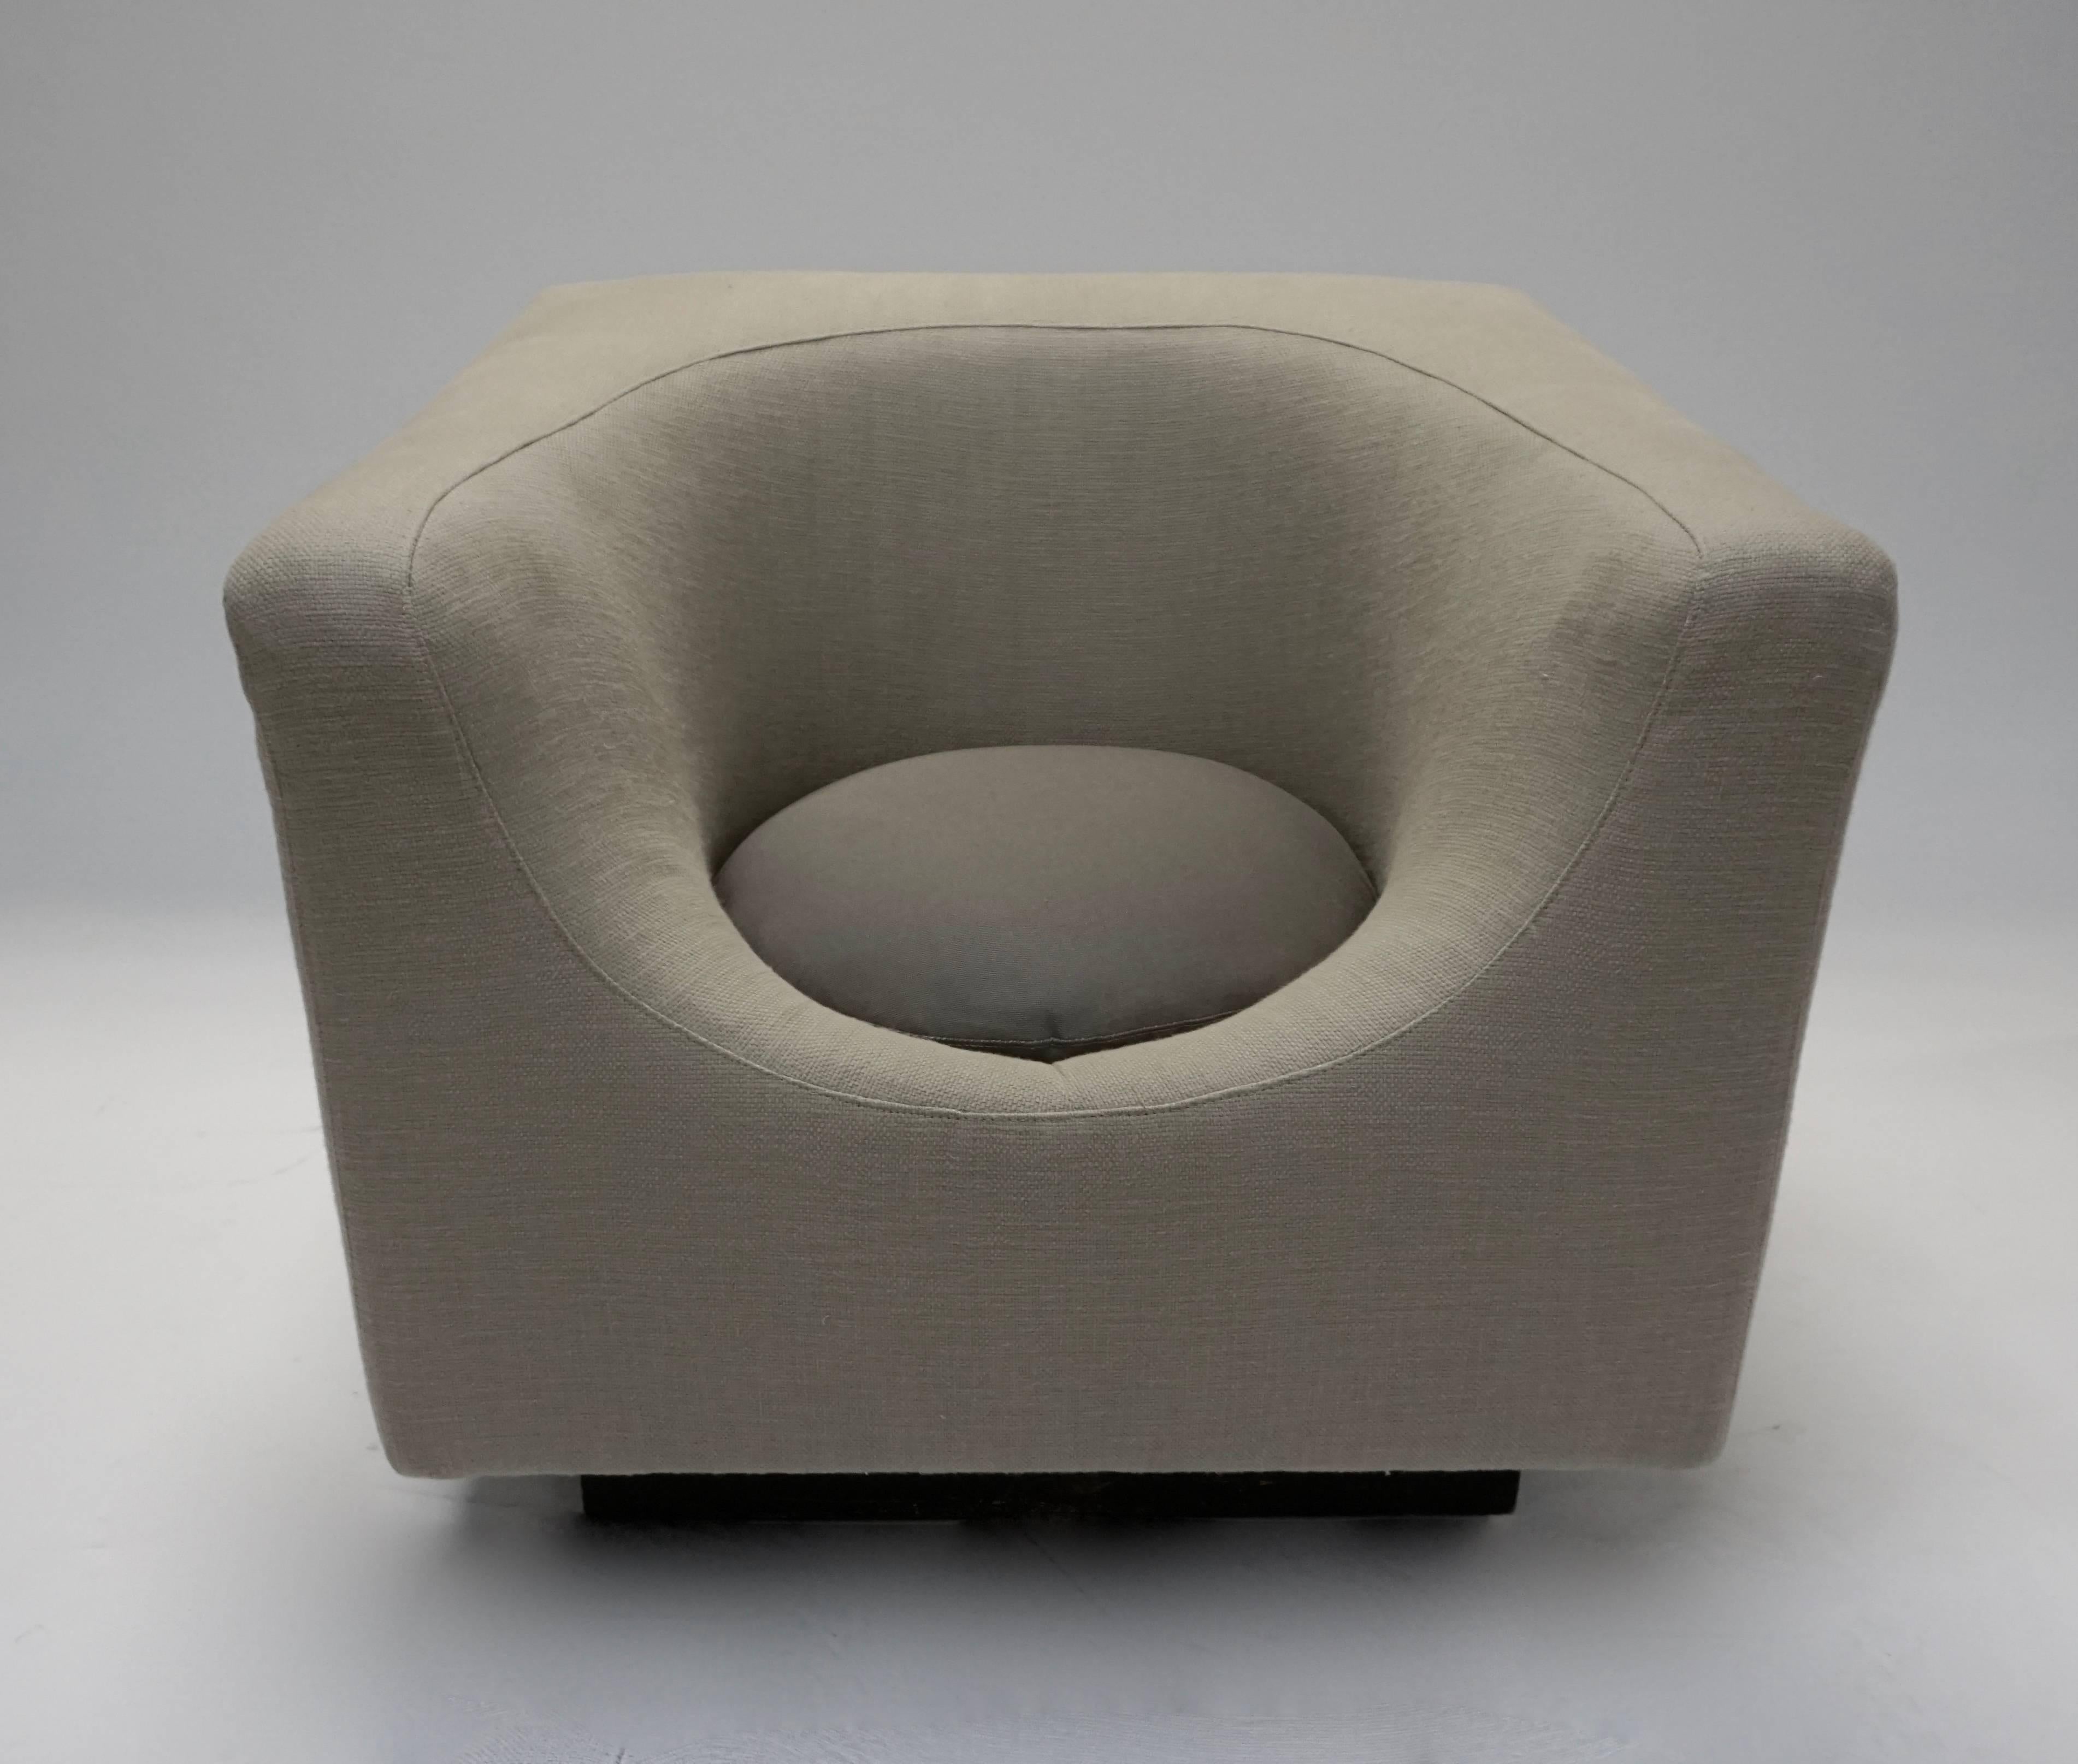 Saporiti chair with the ottoman all redone in new light grey-beige fabric on the main body, and a darker grey on the pillows. Heavy chair and ottoman are both on wheels concealed under the black painted wood bases. Circular pillows are not perfectly